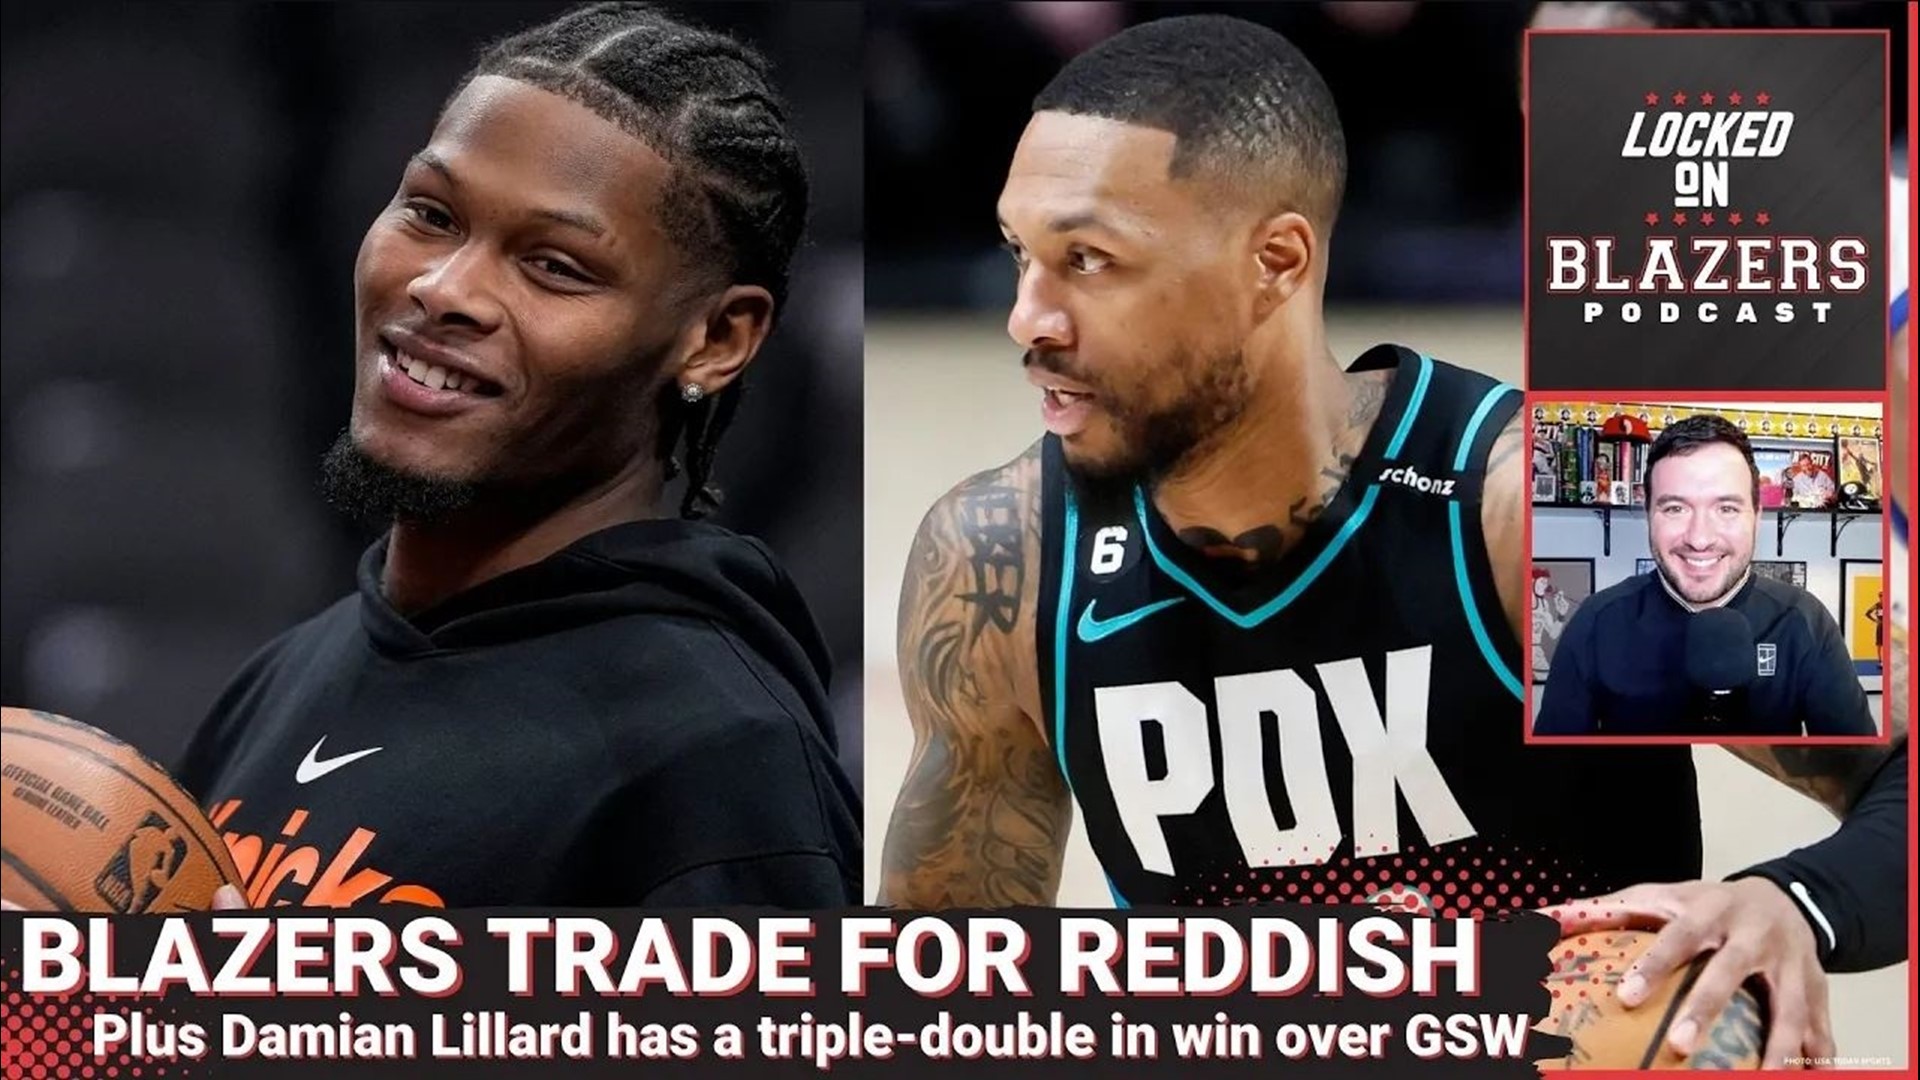 The Blazers traded Josh Hart to the New York Knicks for Cam Reddish and a 2023 lotto protected pick. Here's why it was a good trade.